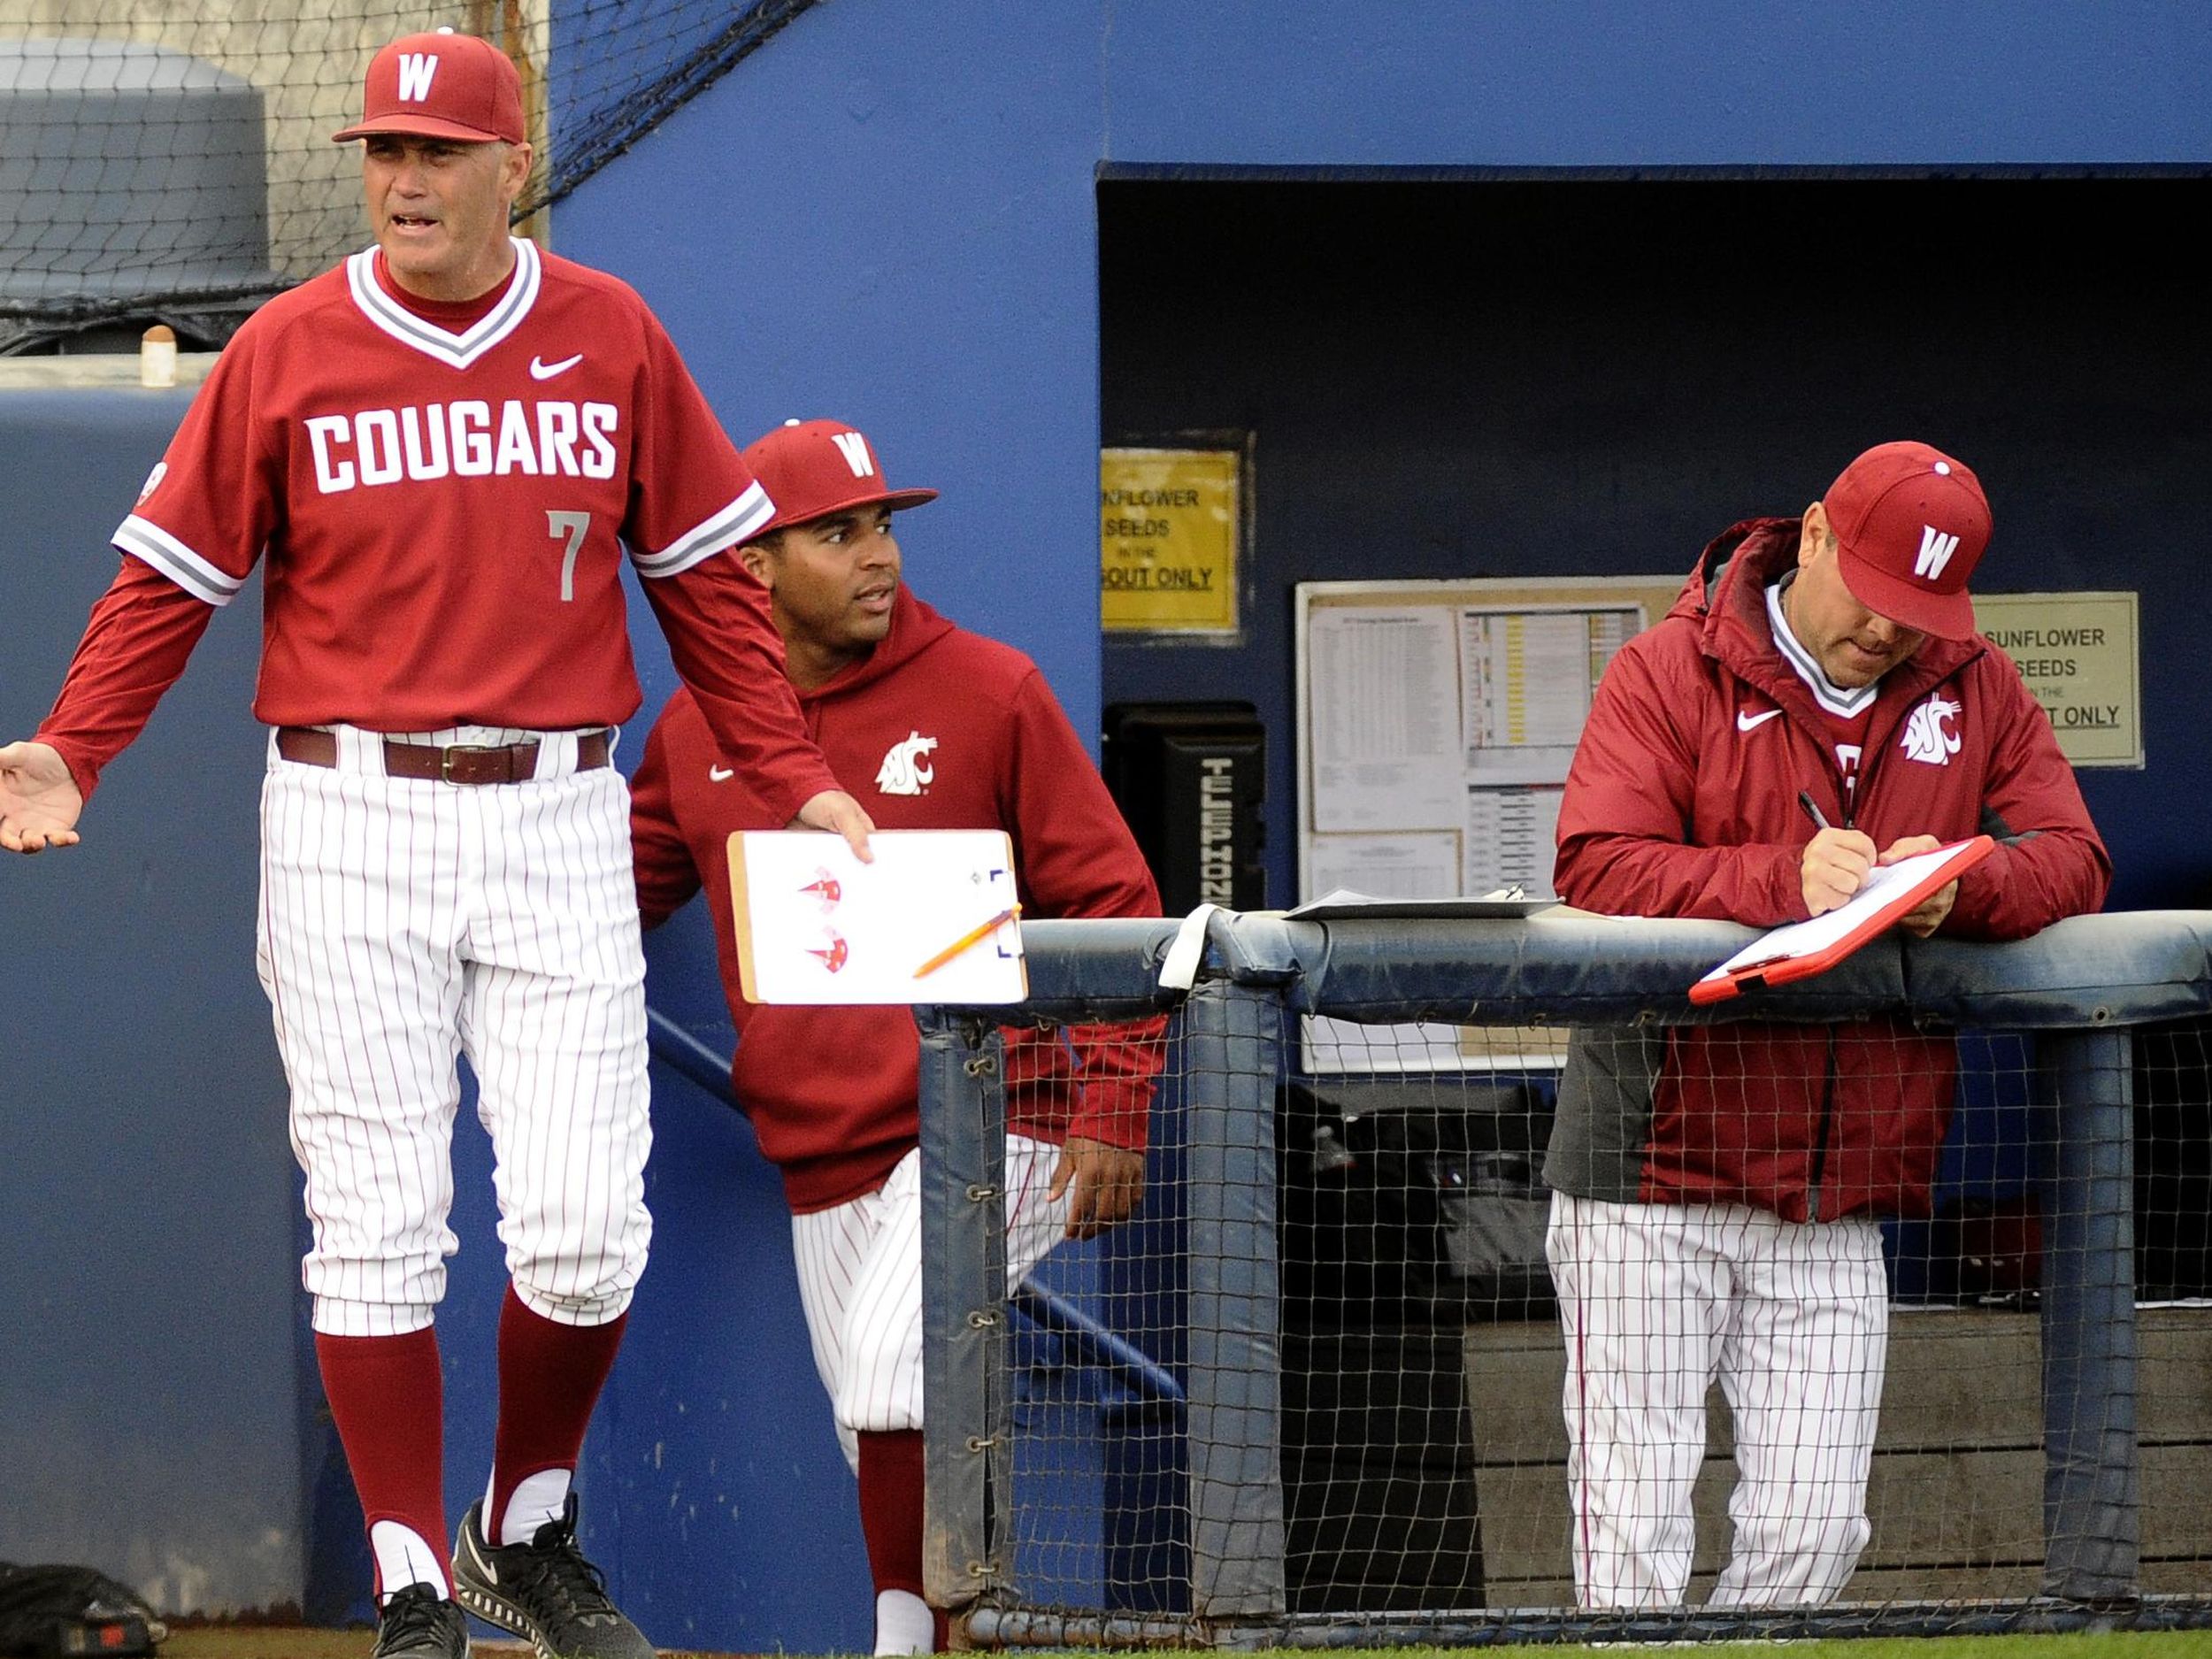 WSU Baseball hosts No. 4 Oregon State to begin conference play - CougCenter